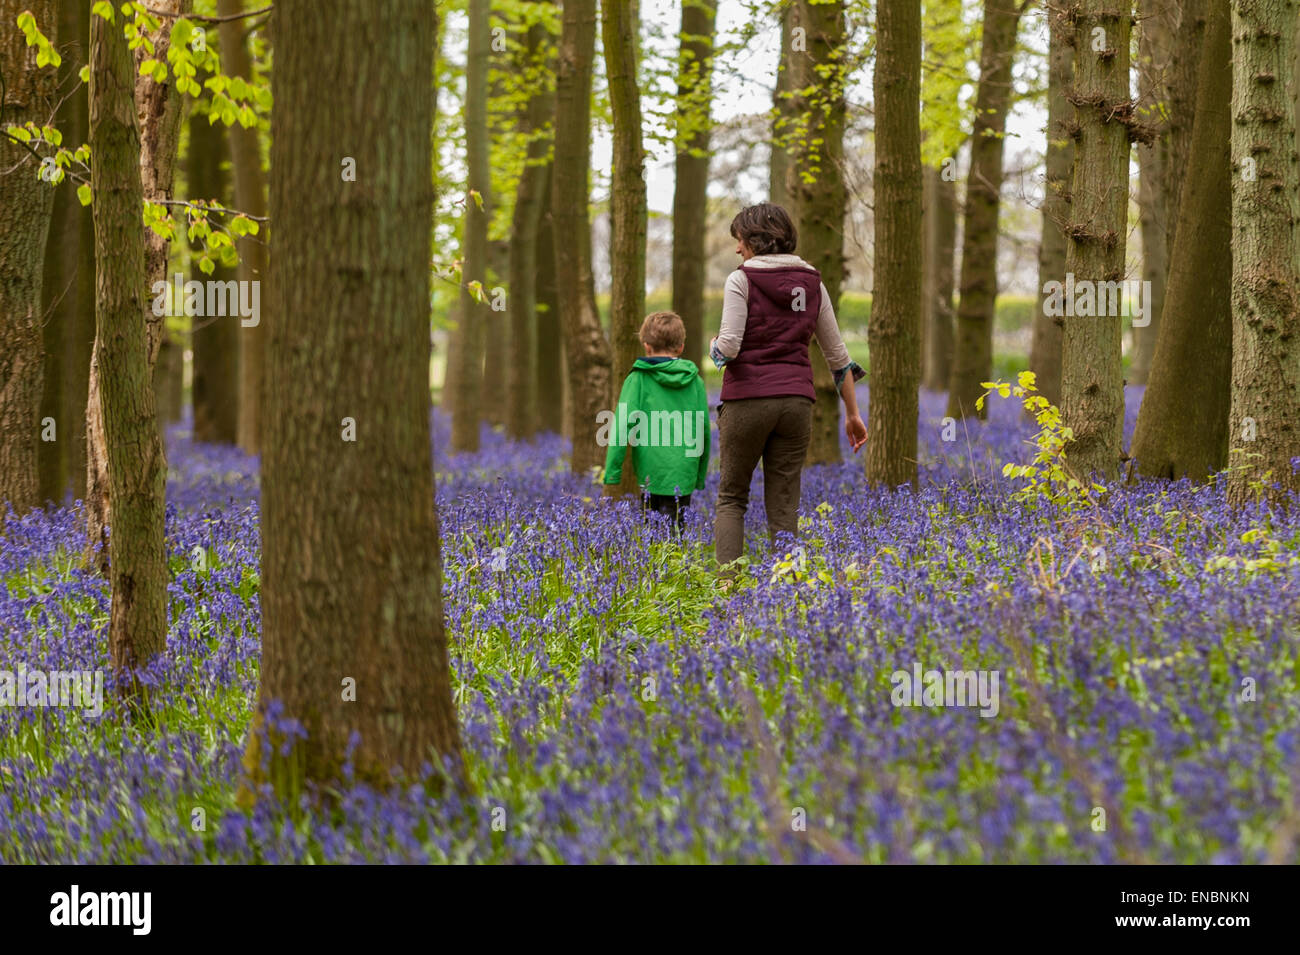 Ringshall, Hertfordshire, UK. 1 May 2015. A mother and child walk through the bluebells. Just in time for the early May bank holiday, the bluebells are nearly in full bloom in Dockey Wood, part of the Ashridge Estate. This wood is renowned for its carpet of bluebells every spring and is regarded as one of the finest examples in the country.  Credit:  Stephen Chung / Alamy Live News Stock Photo